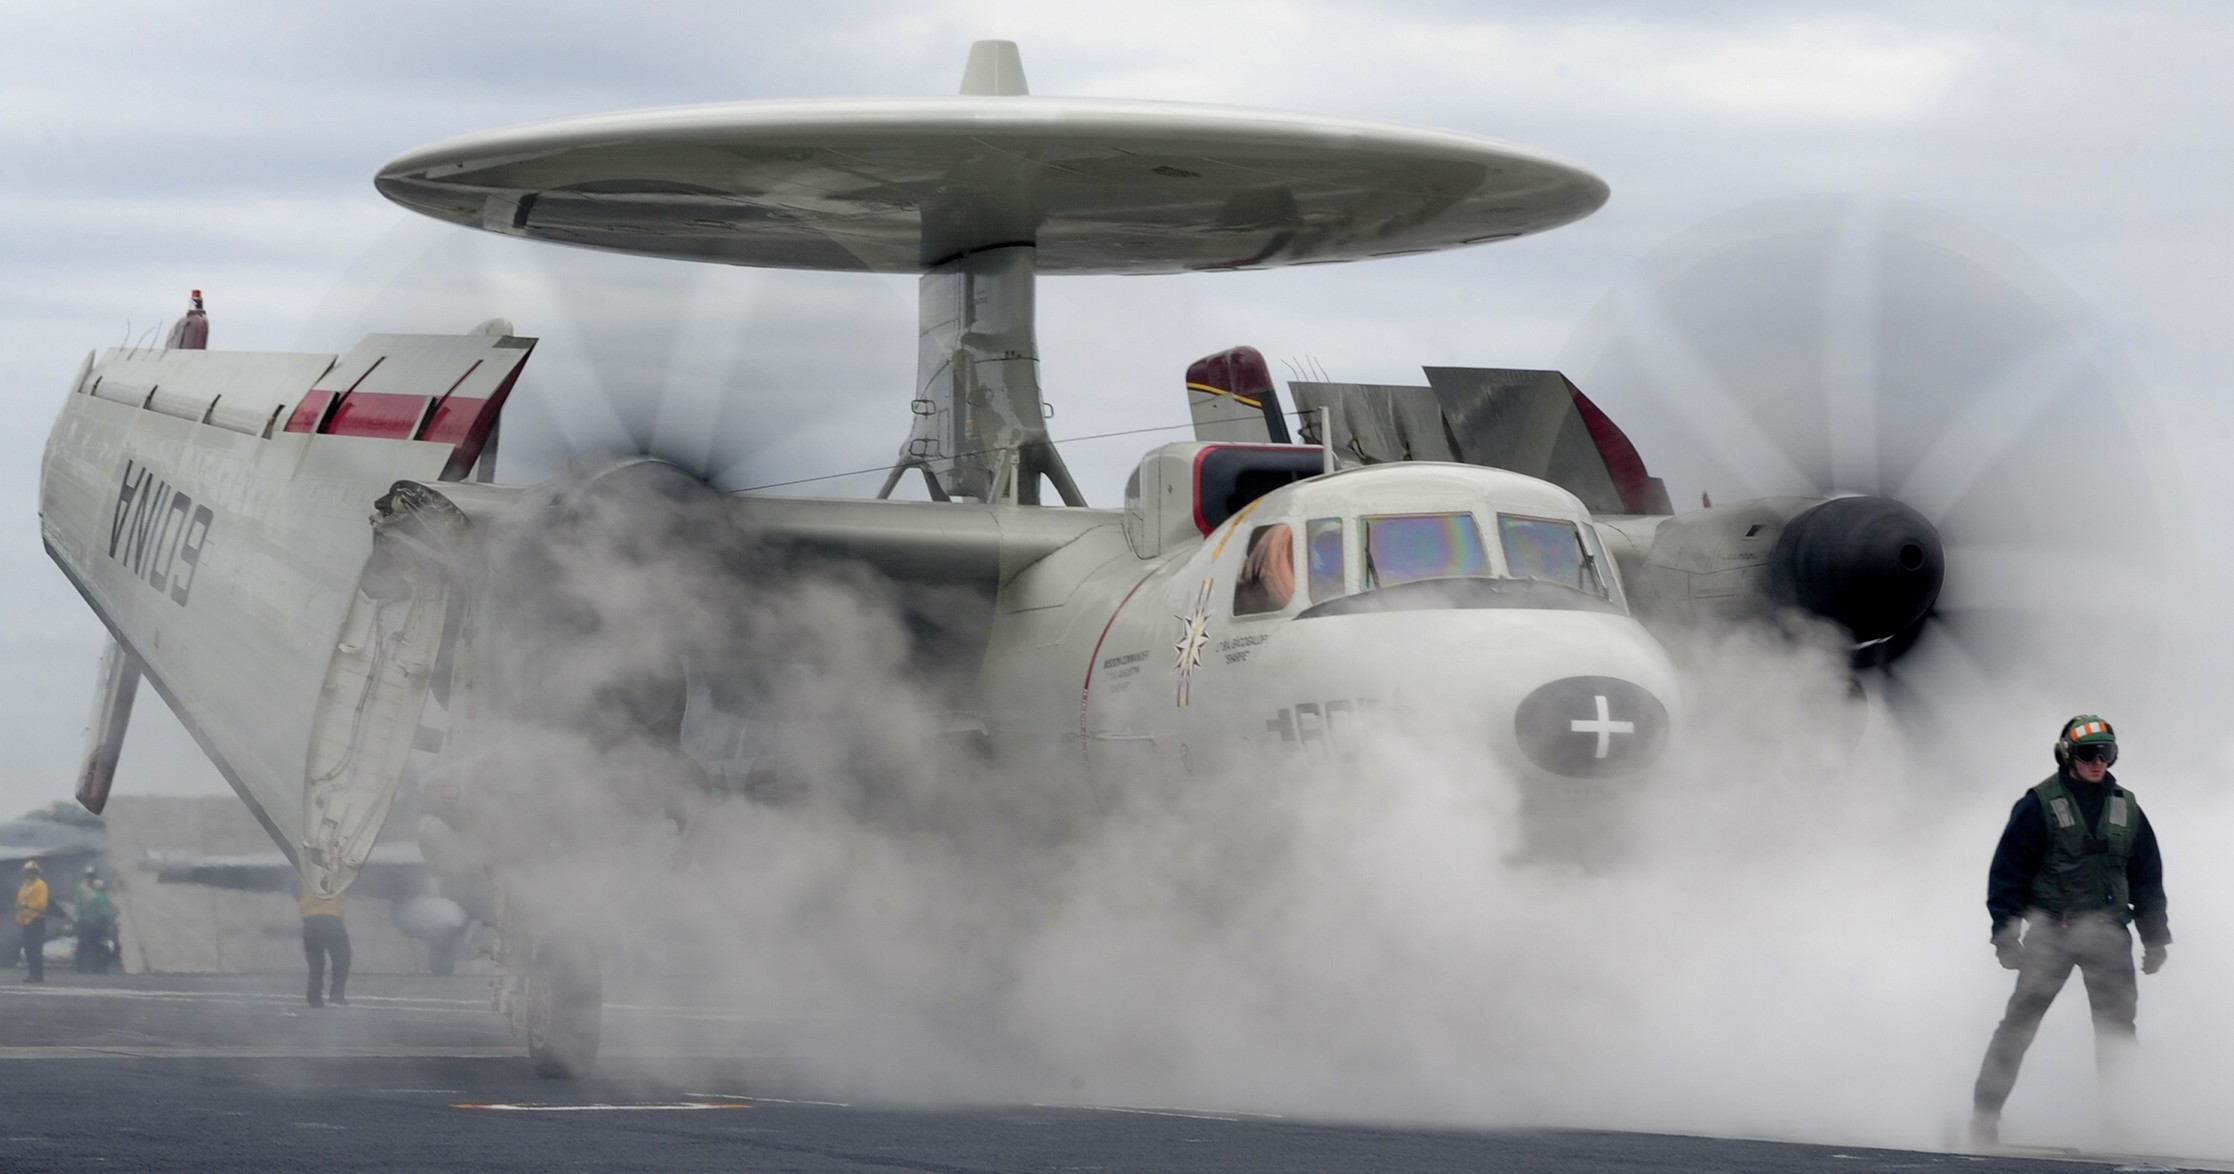 vaw-116 sun kings airborne command control squadron carrier early warning cvw-17 uss carl vinson cvn-70 34